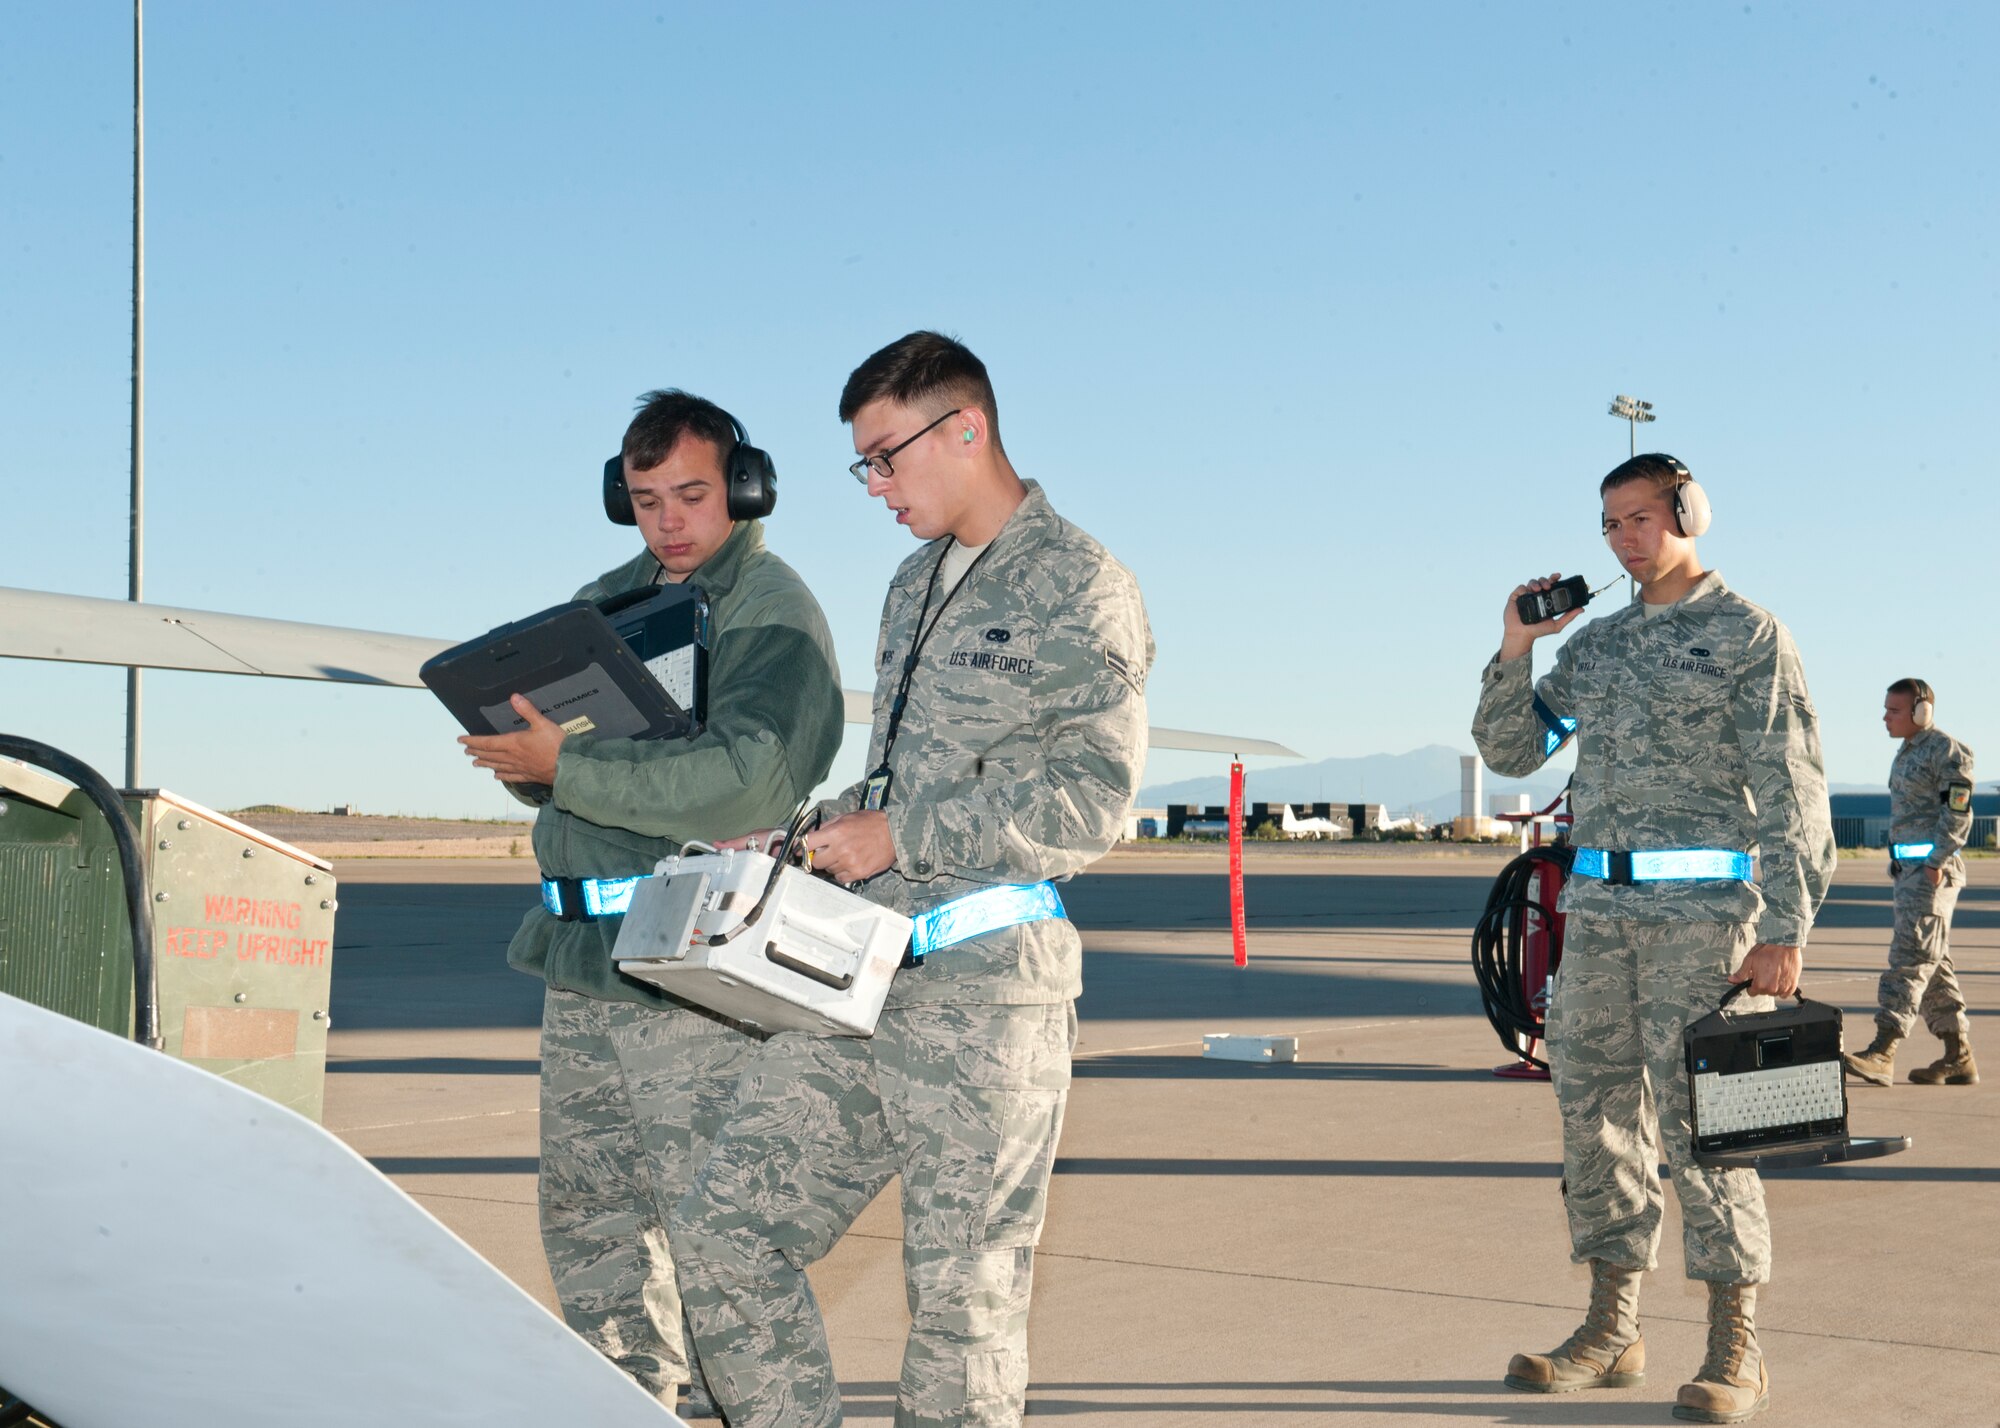 Airman 1st Class Ryan Noonan and Airman 1st Class Jacob Powers, both 849th Aircraft Maintenance Squadron avionics specialists perform maintenance checks on the MQ-1 Predator as Airman 1st Class Justin Kryla, 849th Aircraft Maintenance Squadron crew chief, communicates with the aircrew at Holloman Air Force Base, N.M., Sept. 25. The Predator’s primary functions are to fulfill reconnaissance and forward observation roles.  In addition to the pilot and sensor operator who control the aircraft from a ground control station, flying an MQ-1 requires a culmination of efforts from various squadrons. (U.S. Air Force photo by Airman 1st Class Daniel E. Liddicoet/Released)